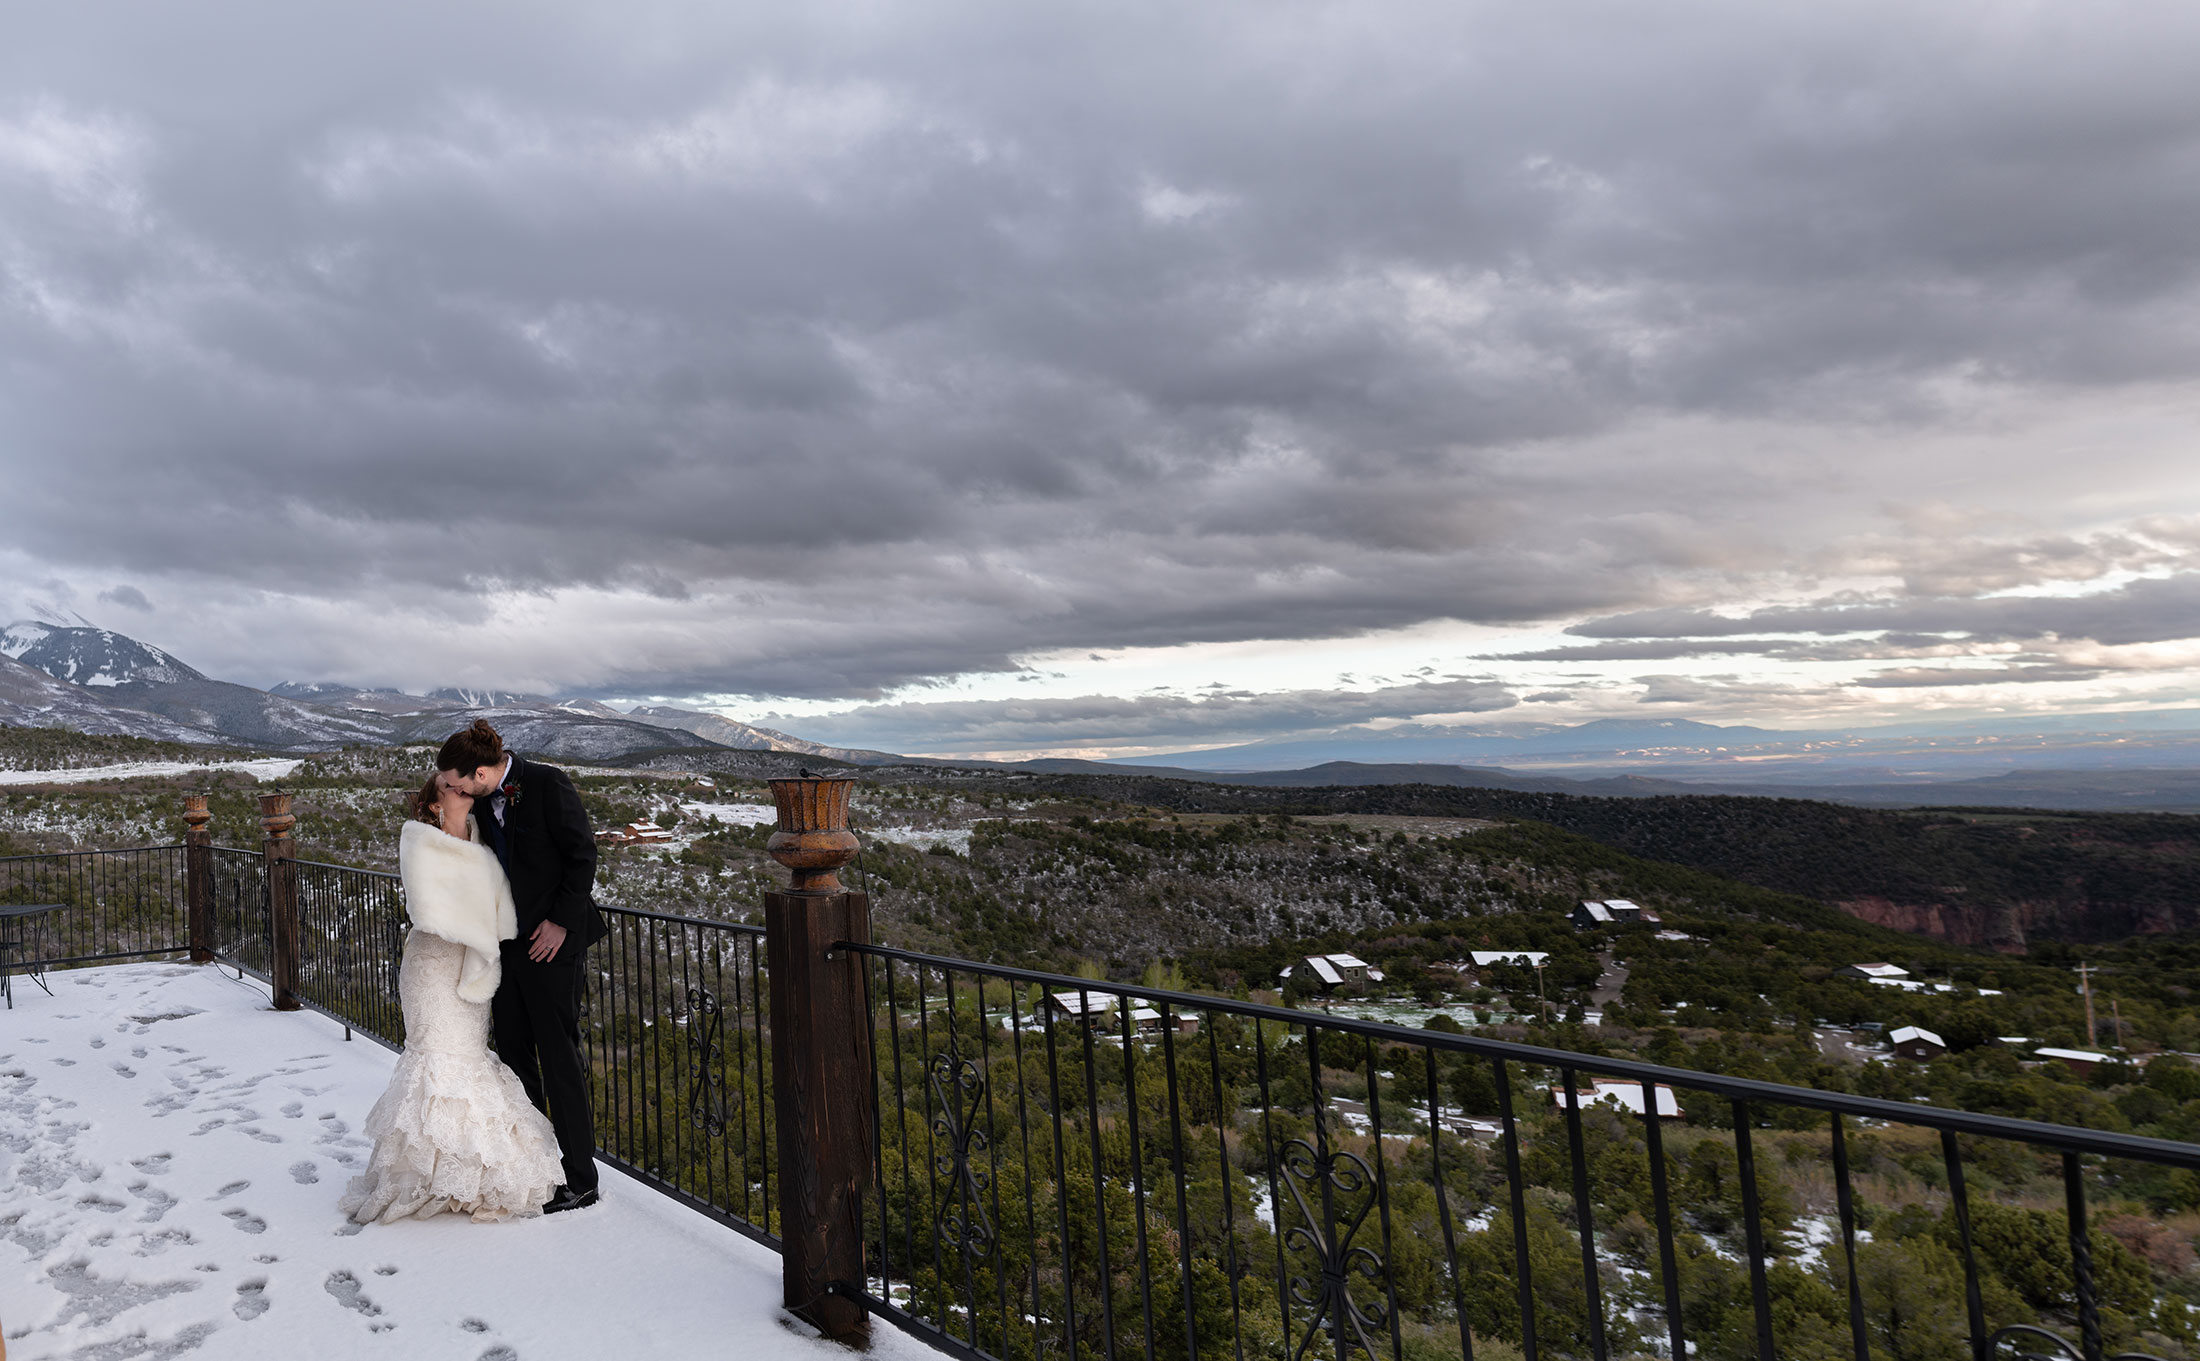 A Moab wedding up in the mountains with snow.